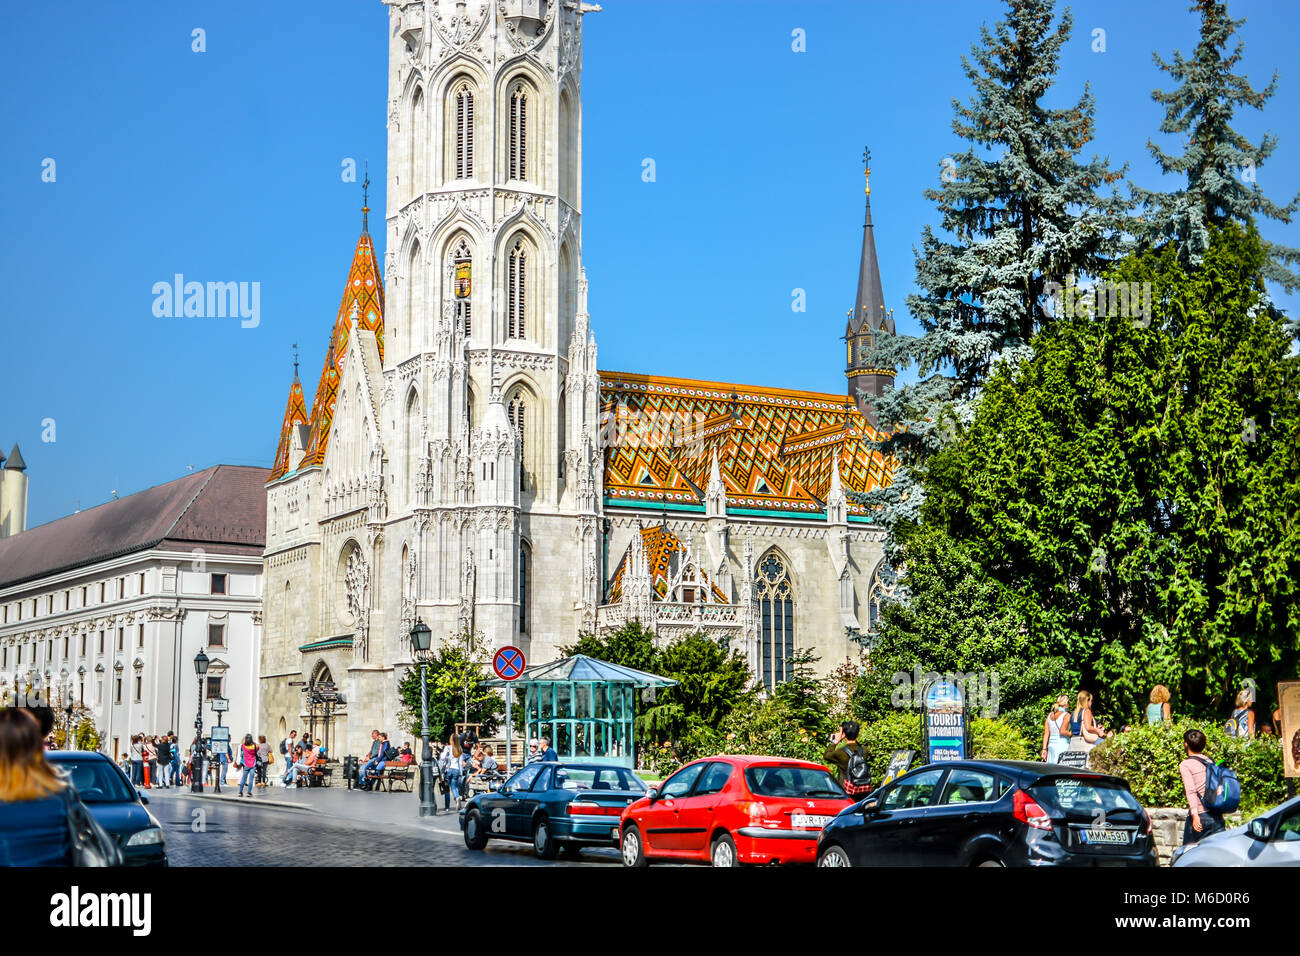 A sunny day at the Buda Castle Hill District in Budapest Hungary as tourists enjoy the view of Matthias Church Stock Photo